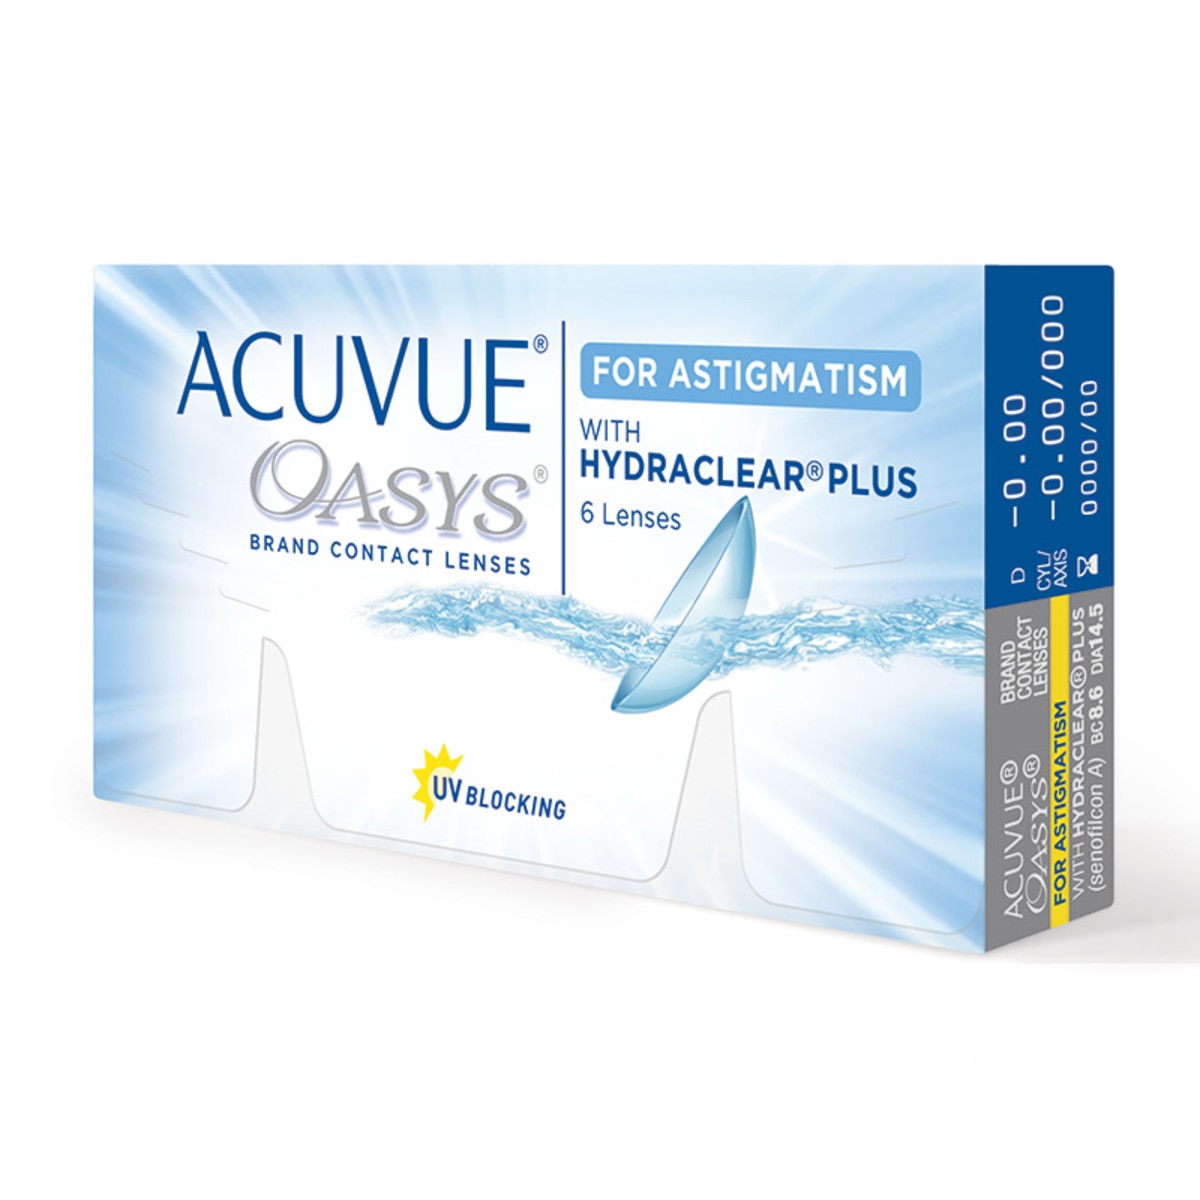 ACUVUE OASYS® con HYDRACLEAR Plus® para Astigmatismo (D -0.5, Cyl/Axis -2.25/110)